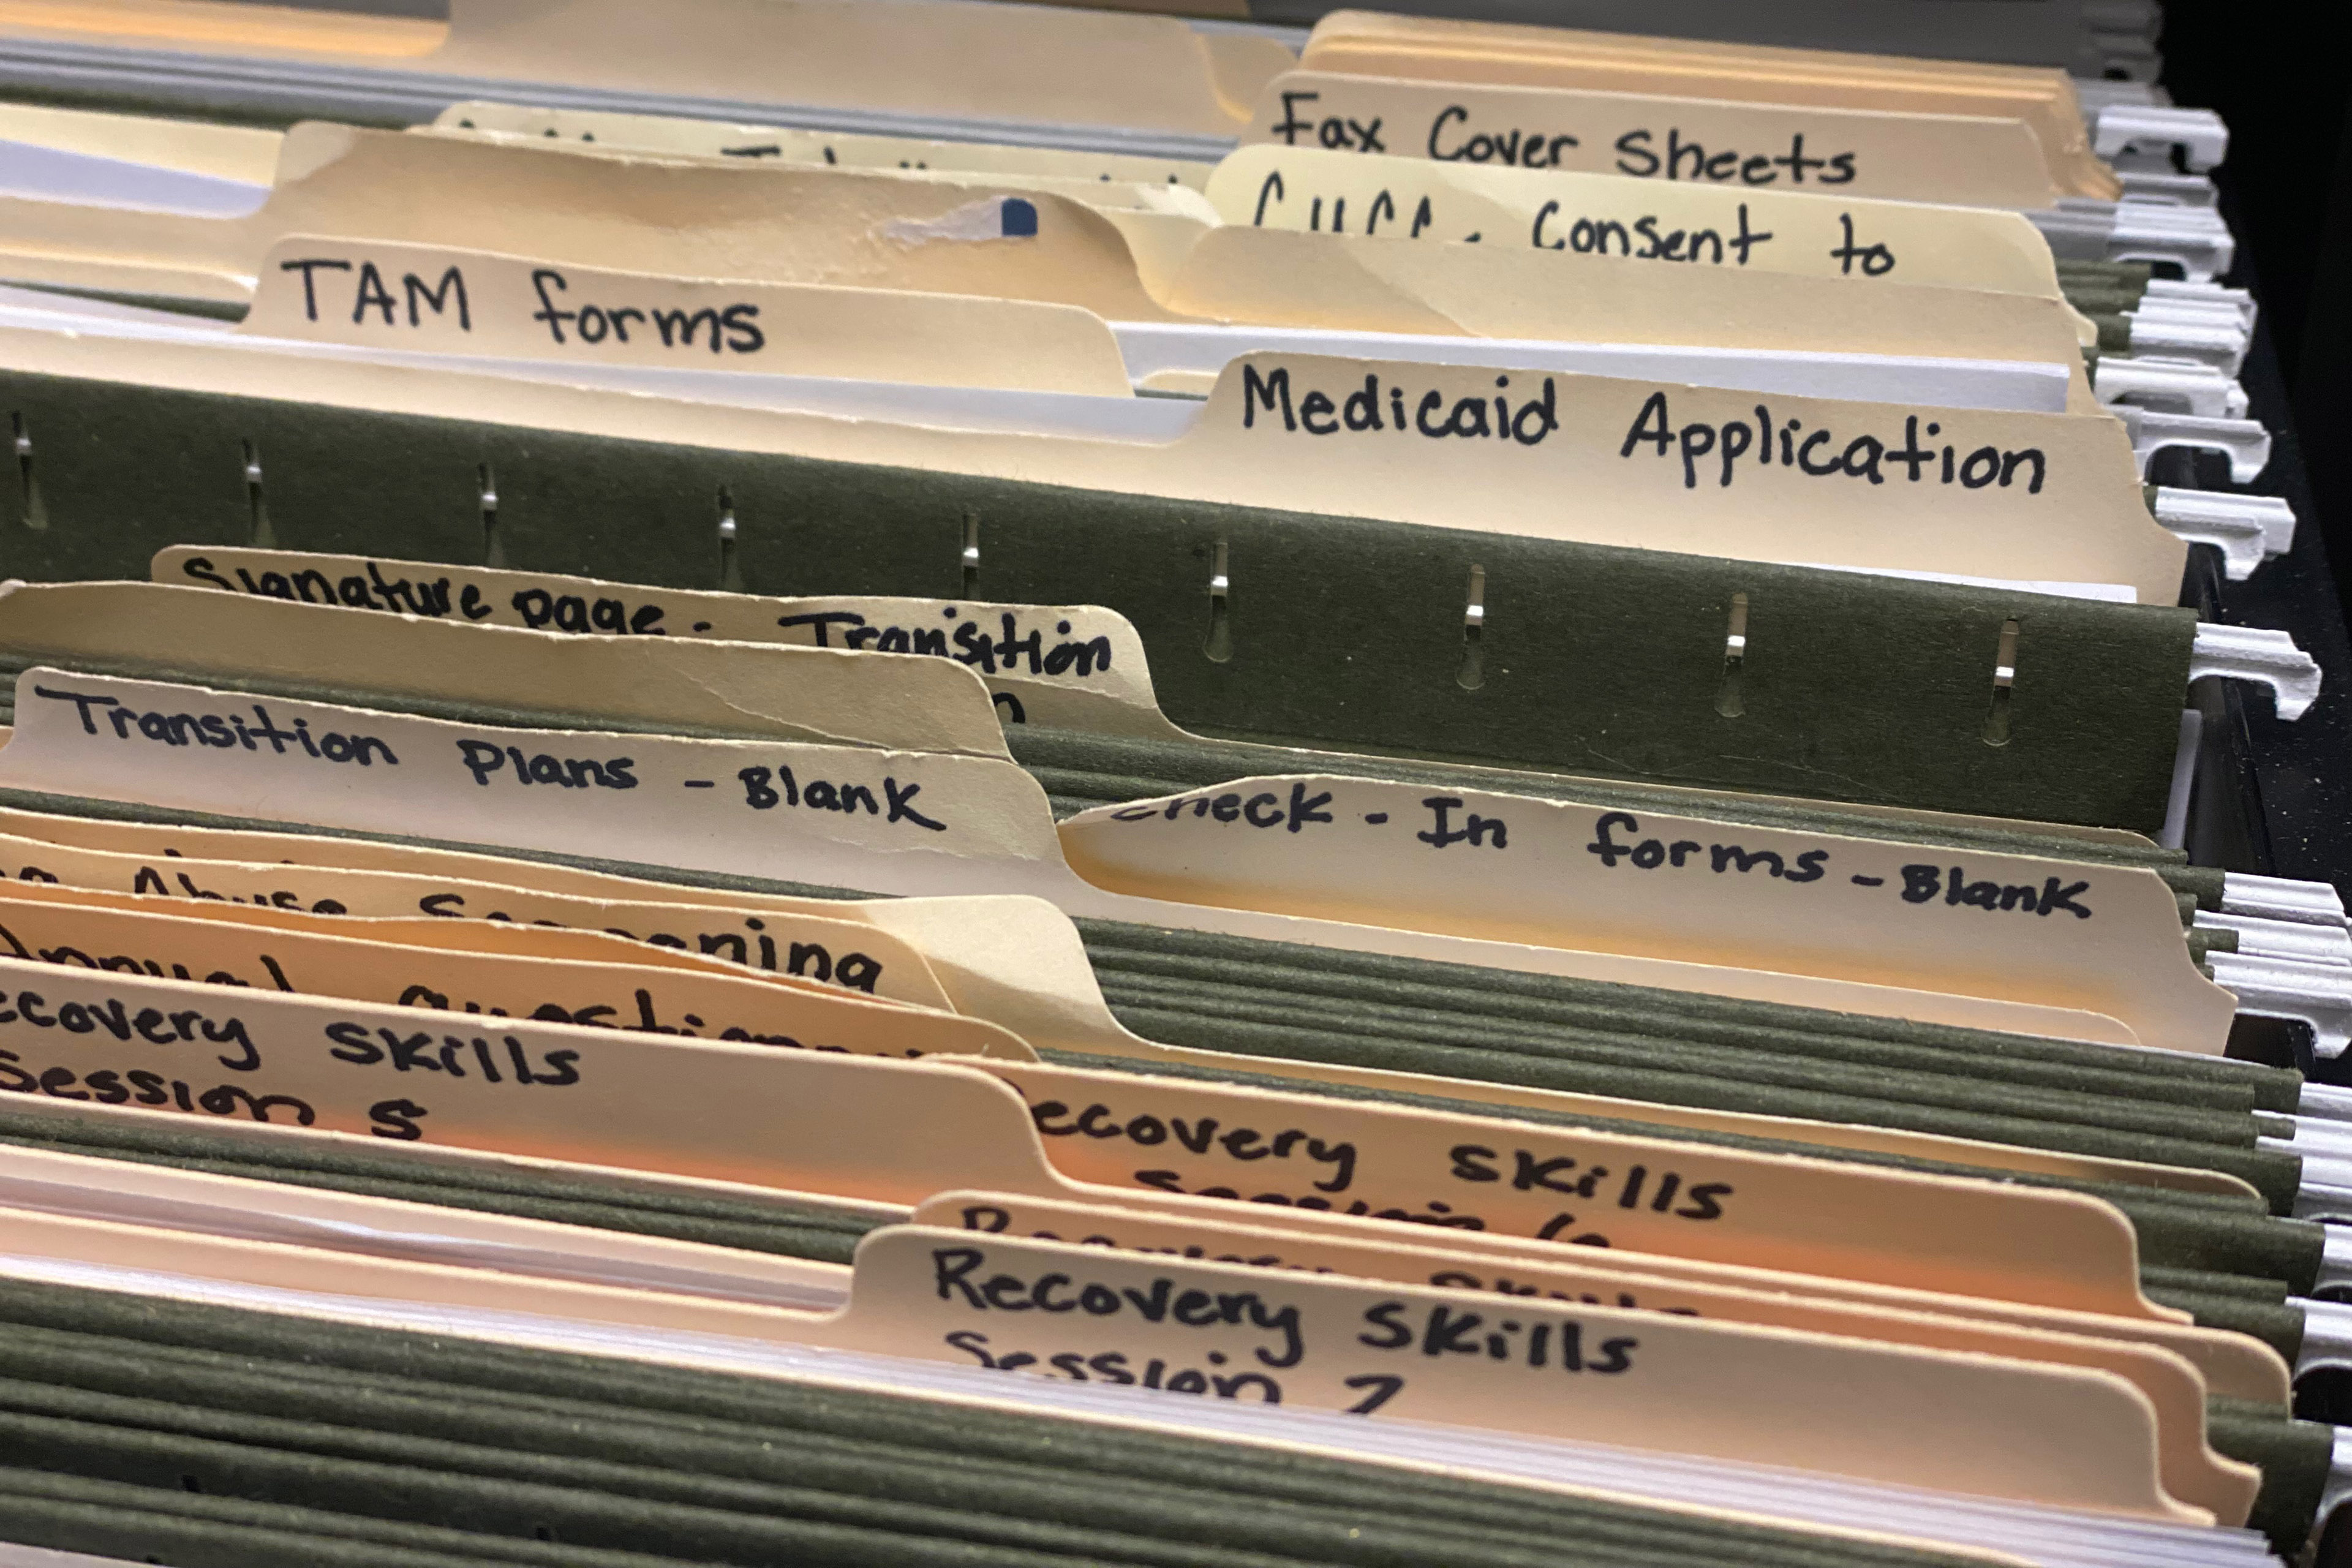 A photograph of a filing cabinet drawer. The folders are labeled in black sharpie. Some that are visible say, "TAM forms / Medicaid Application / Transition plans - Blank / Check-In forms – Blank / Recovery Skills."